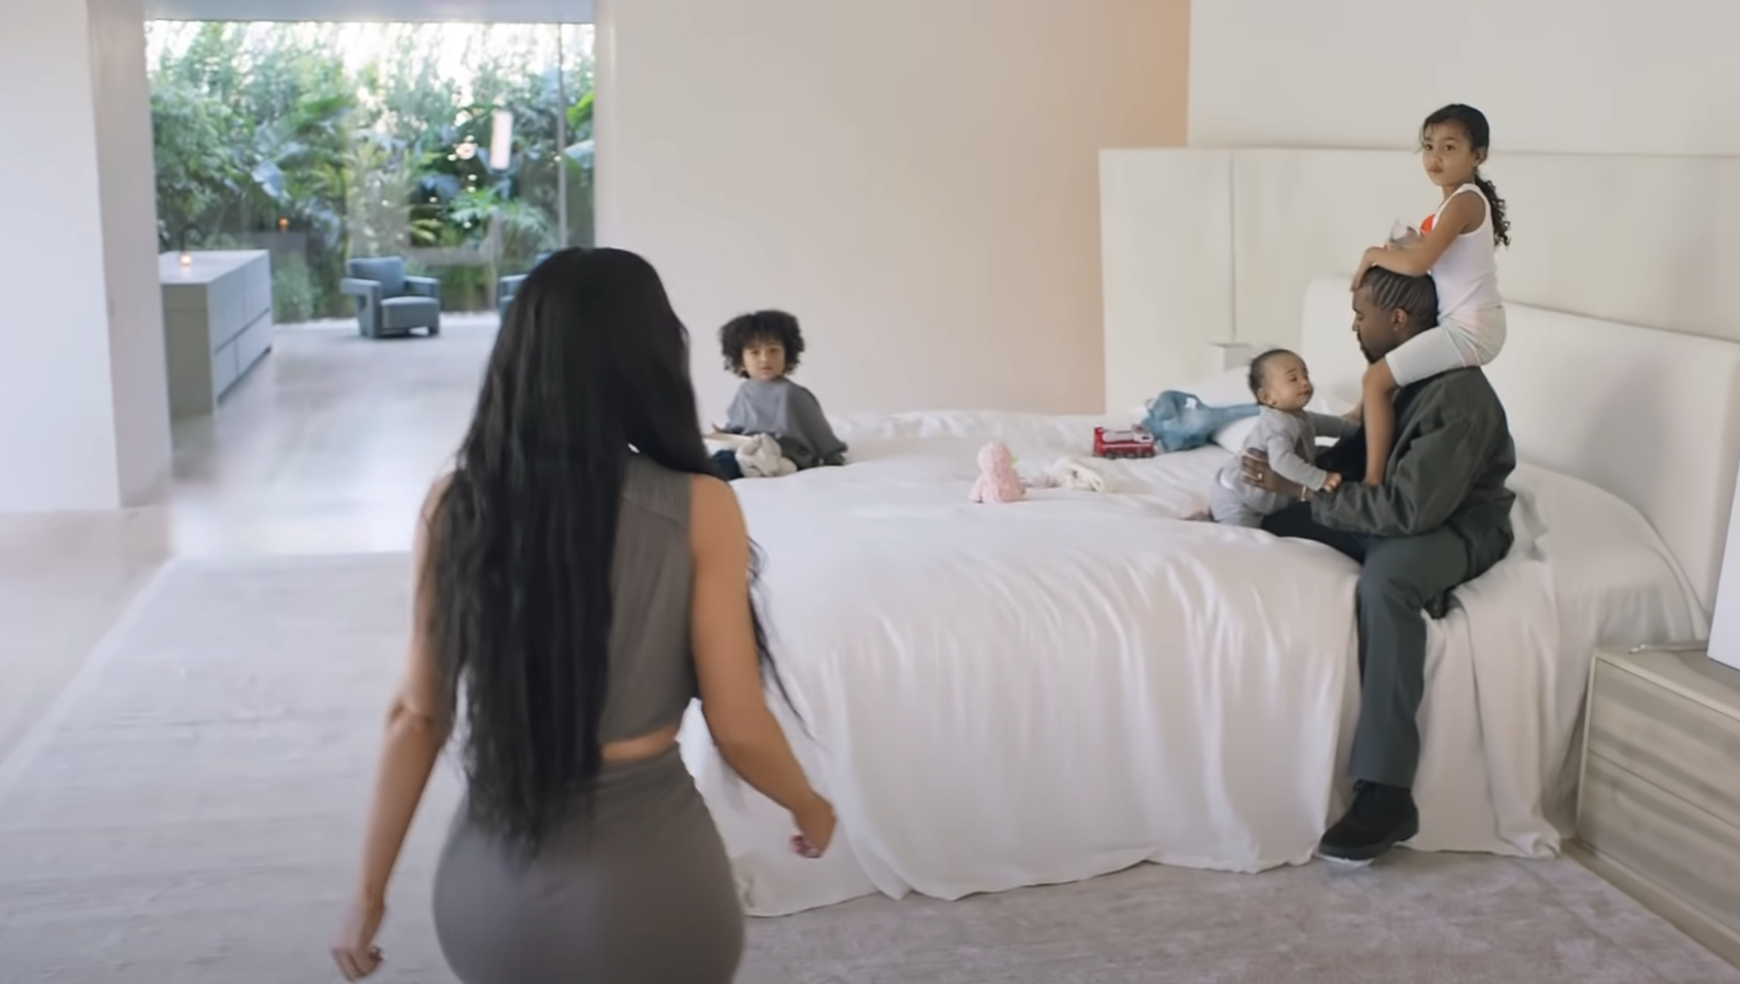 Kim in her bedroom with Kanye and their kids